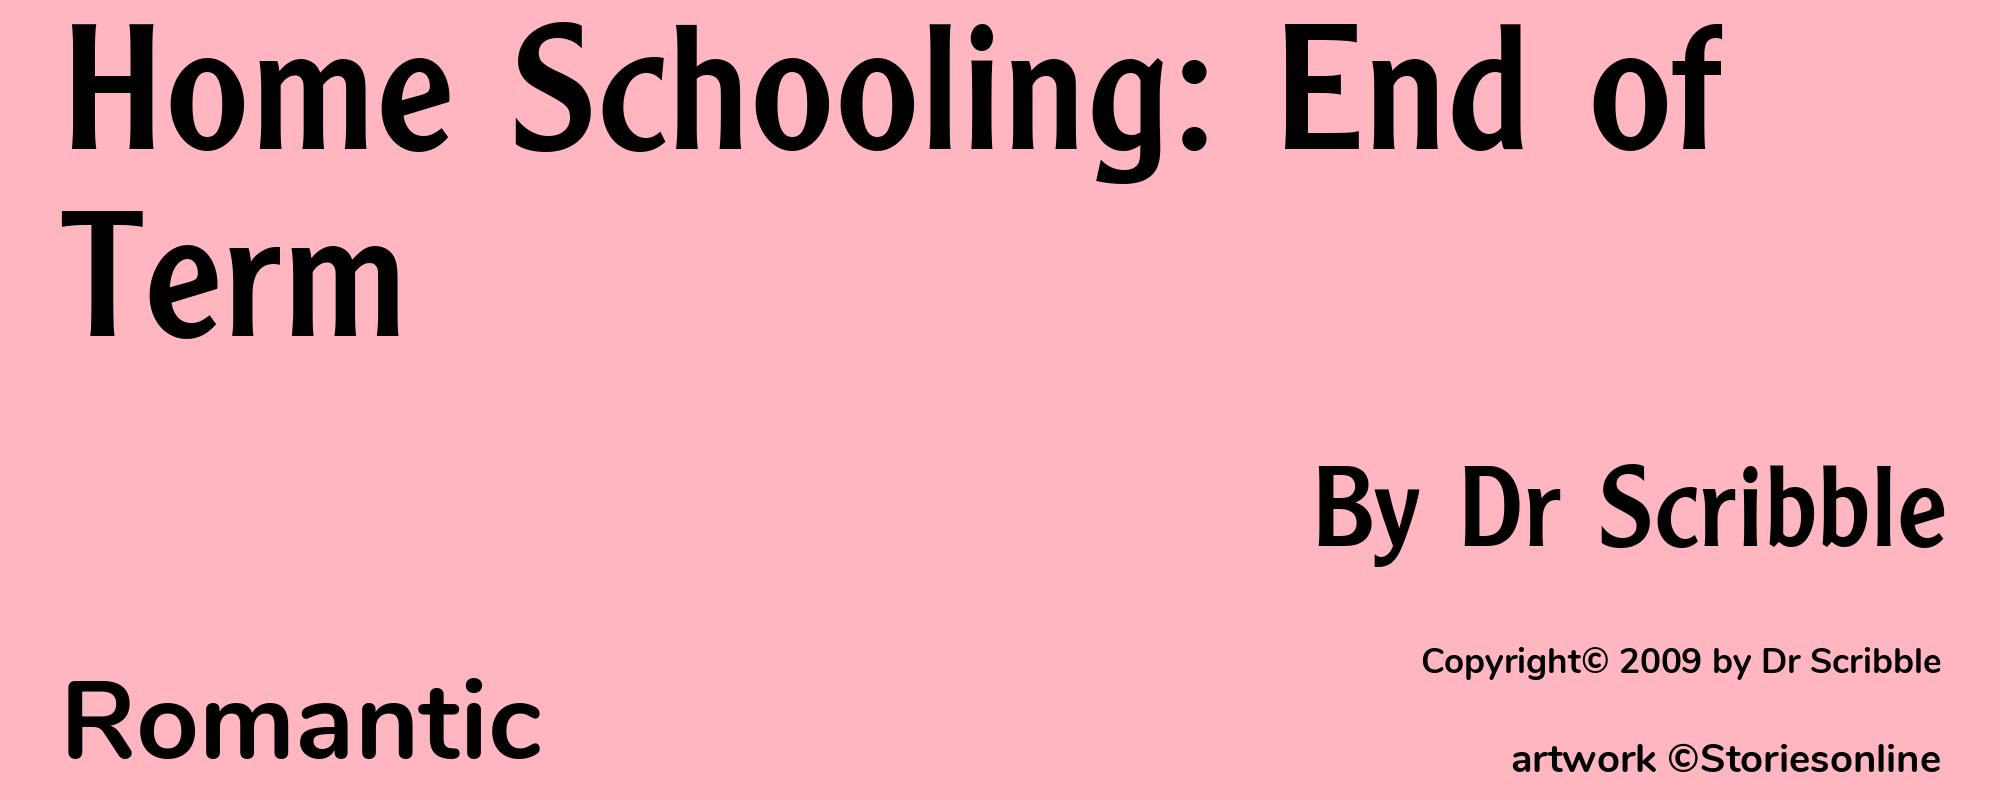 Home Schooling: End of Term - Cover